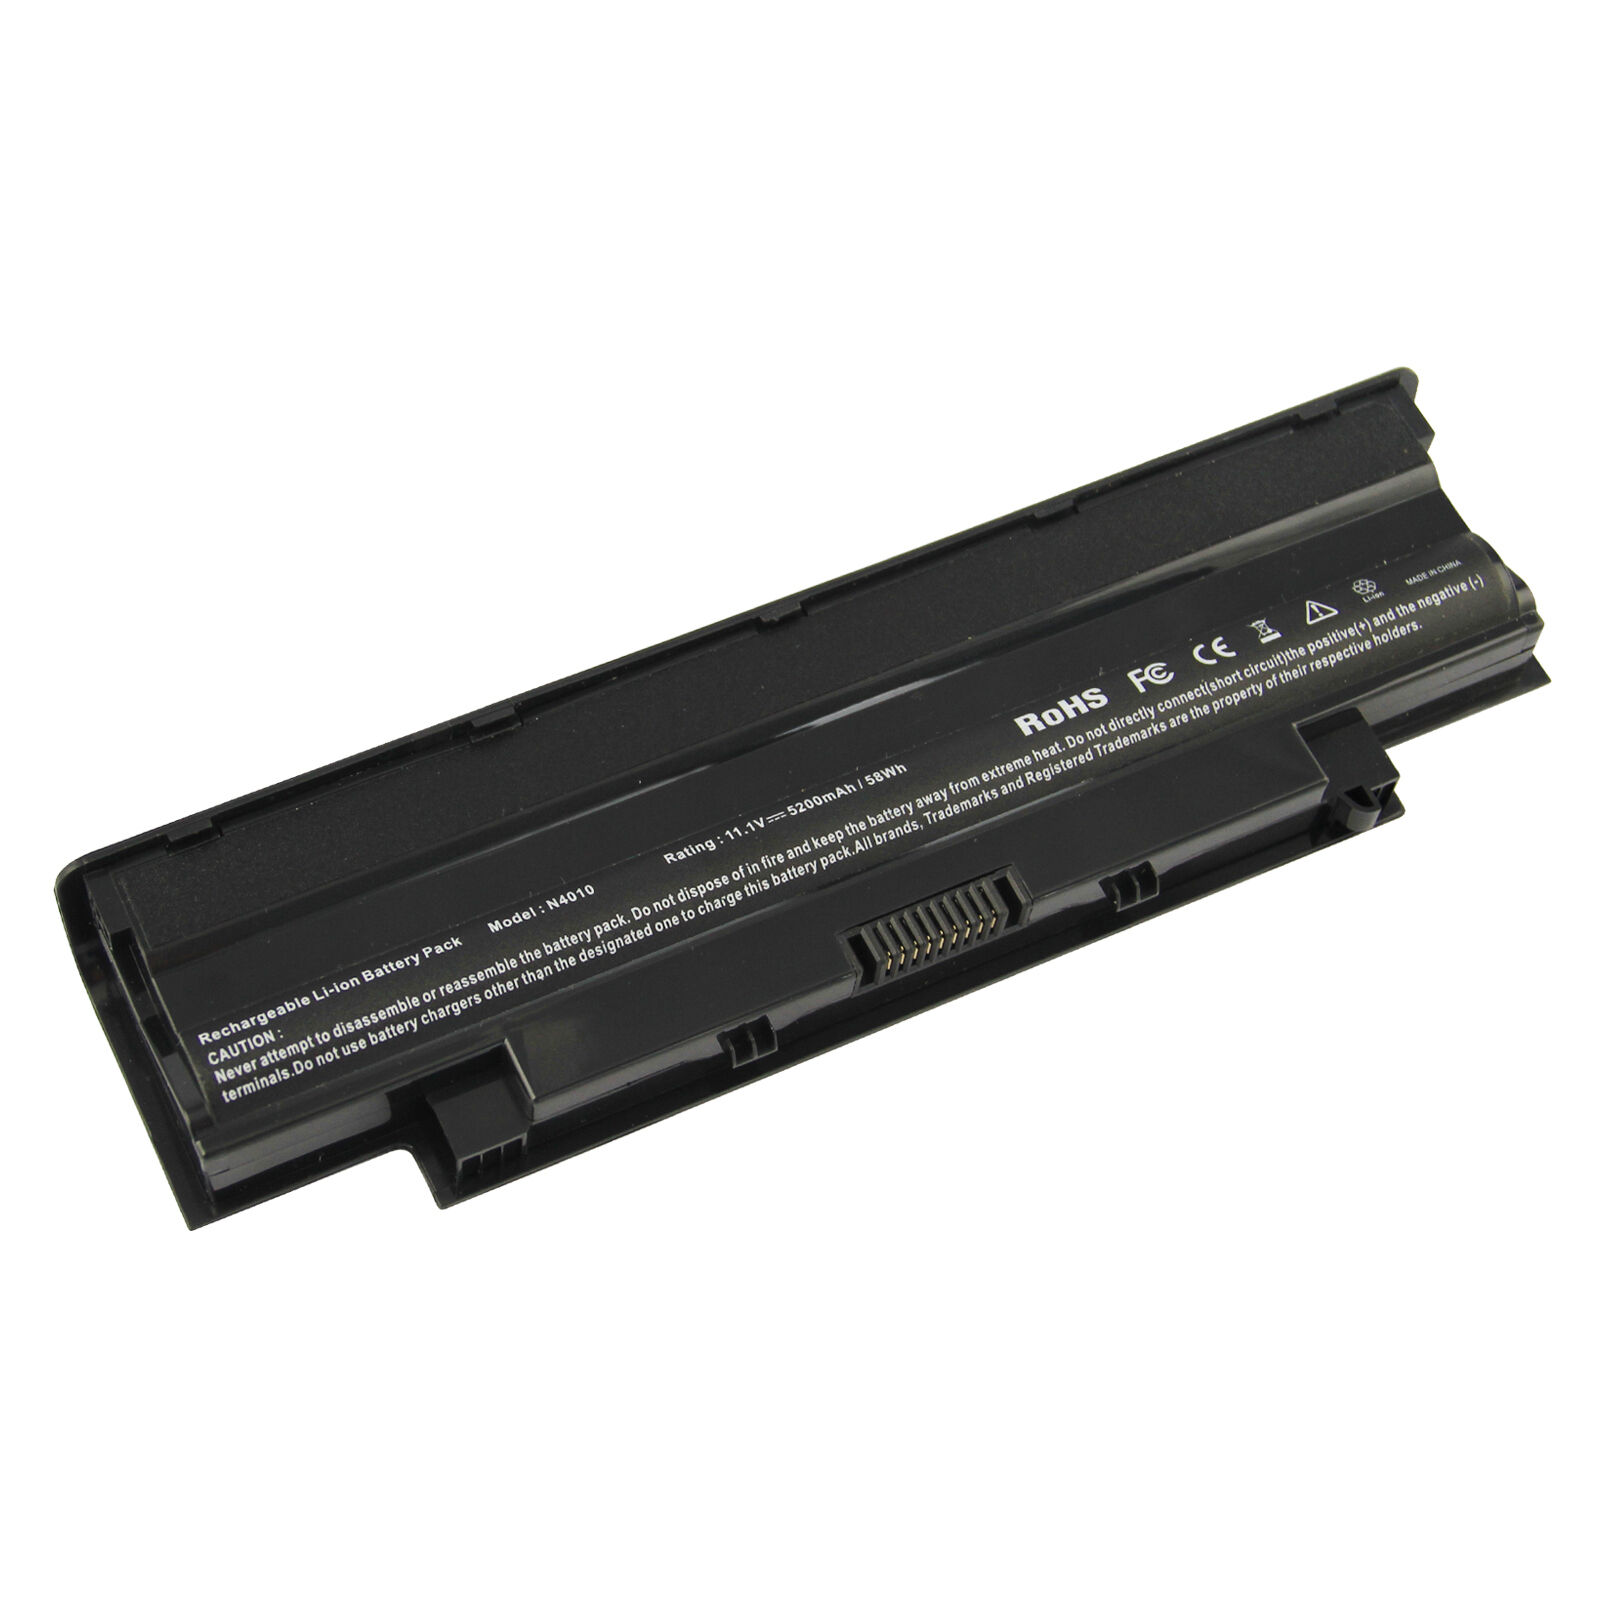 9Cell Battery N4010 FOR Dell Inspiron 13R 14R 17R N4050 N5010 N7010 04YRJH J1KND